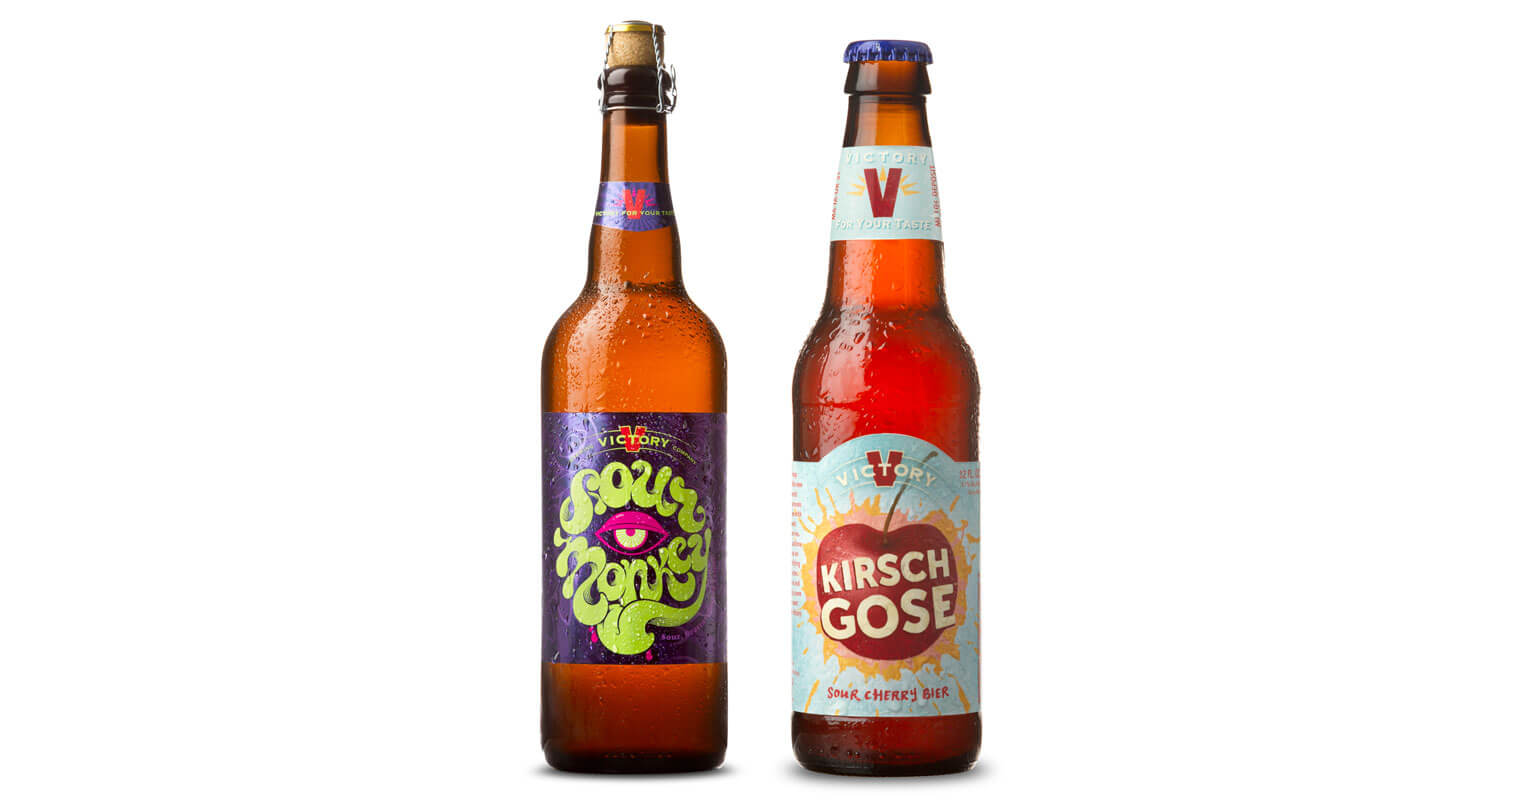 Victory Brewing Co. Brings Back Kirsch Gose and Sour Monkey, beer news, featured image